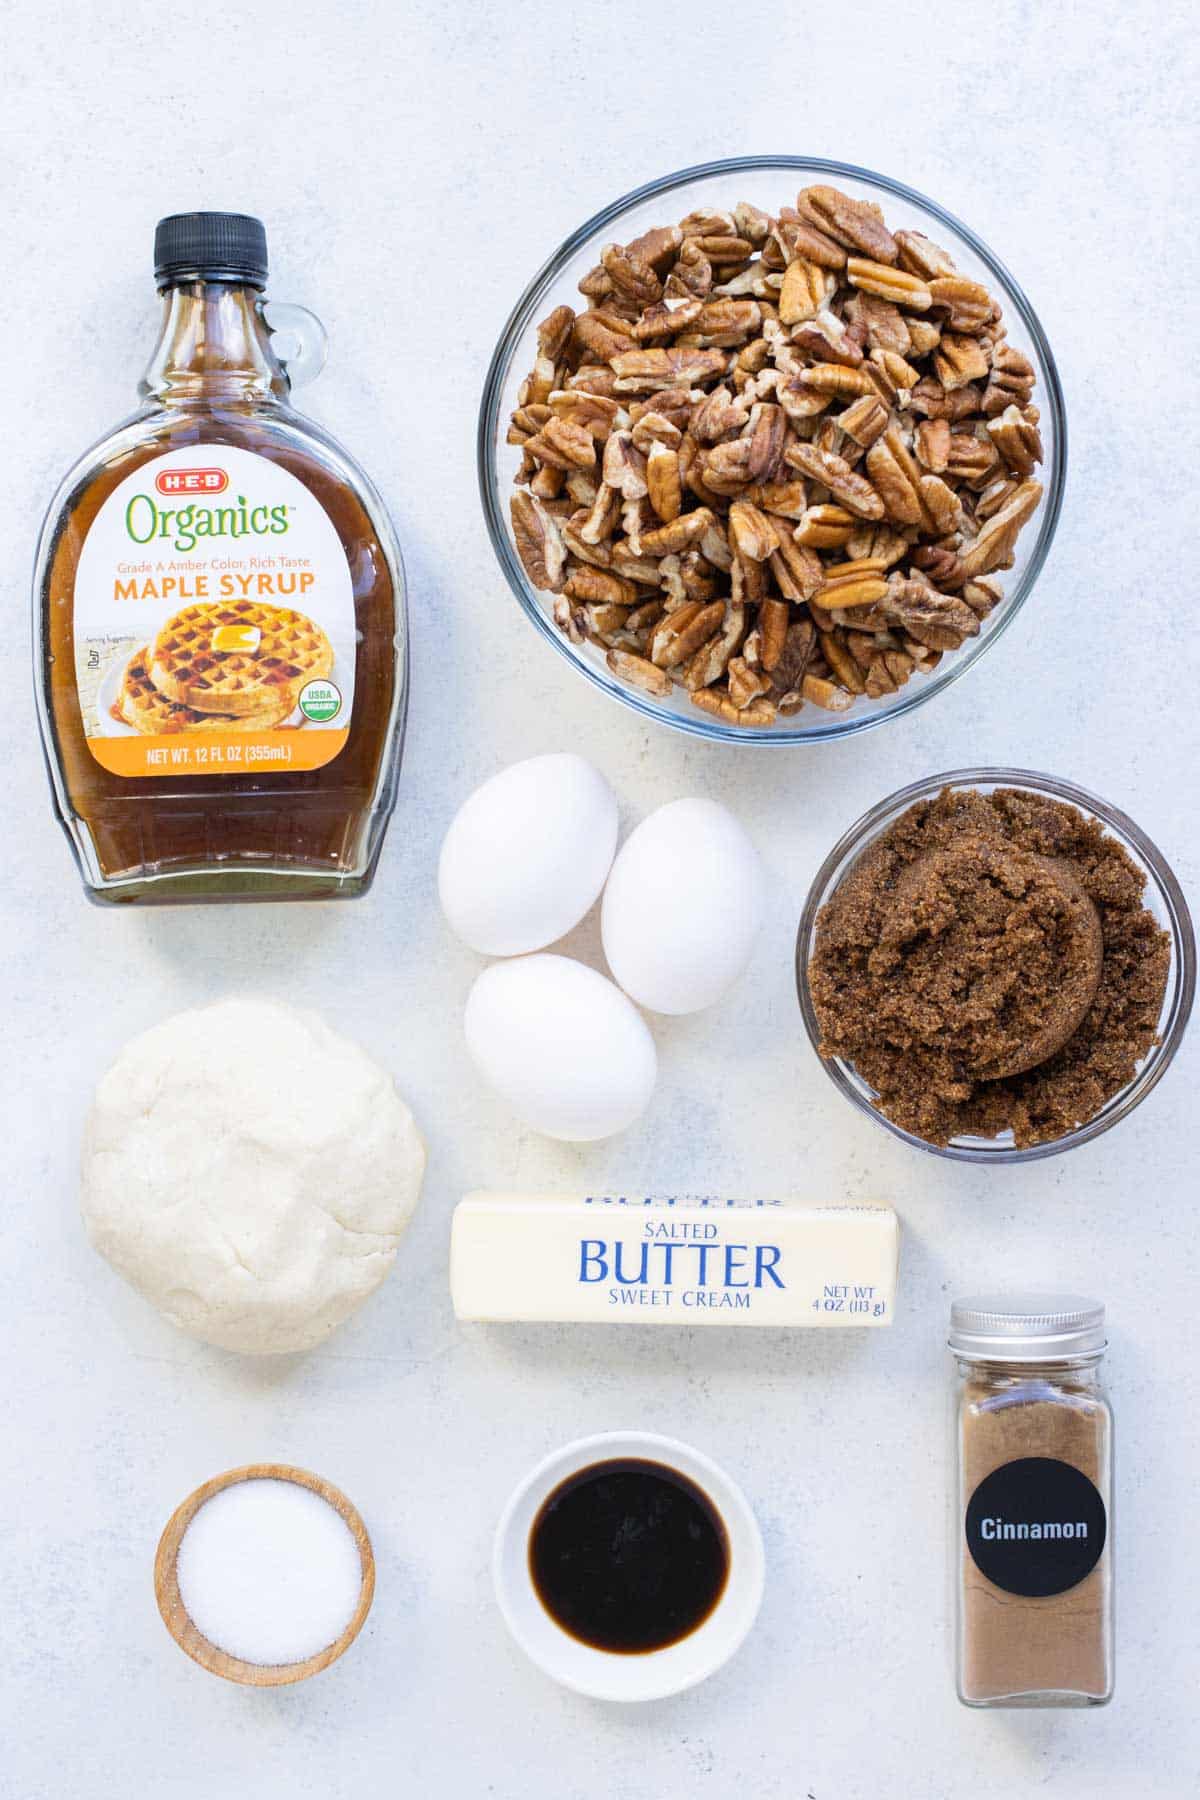 Pie dough, pecans, brown sugar, maple syrup, eggs, and butter are the ingredients in this recipe.